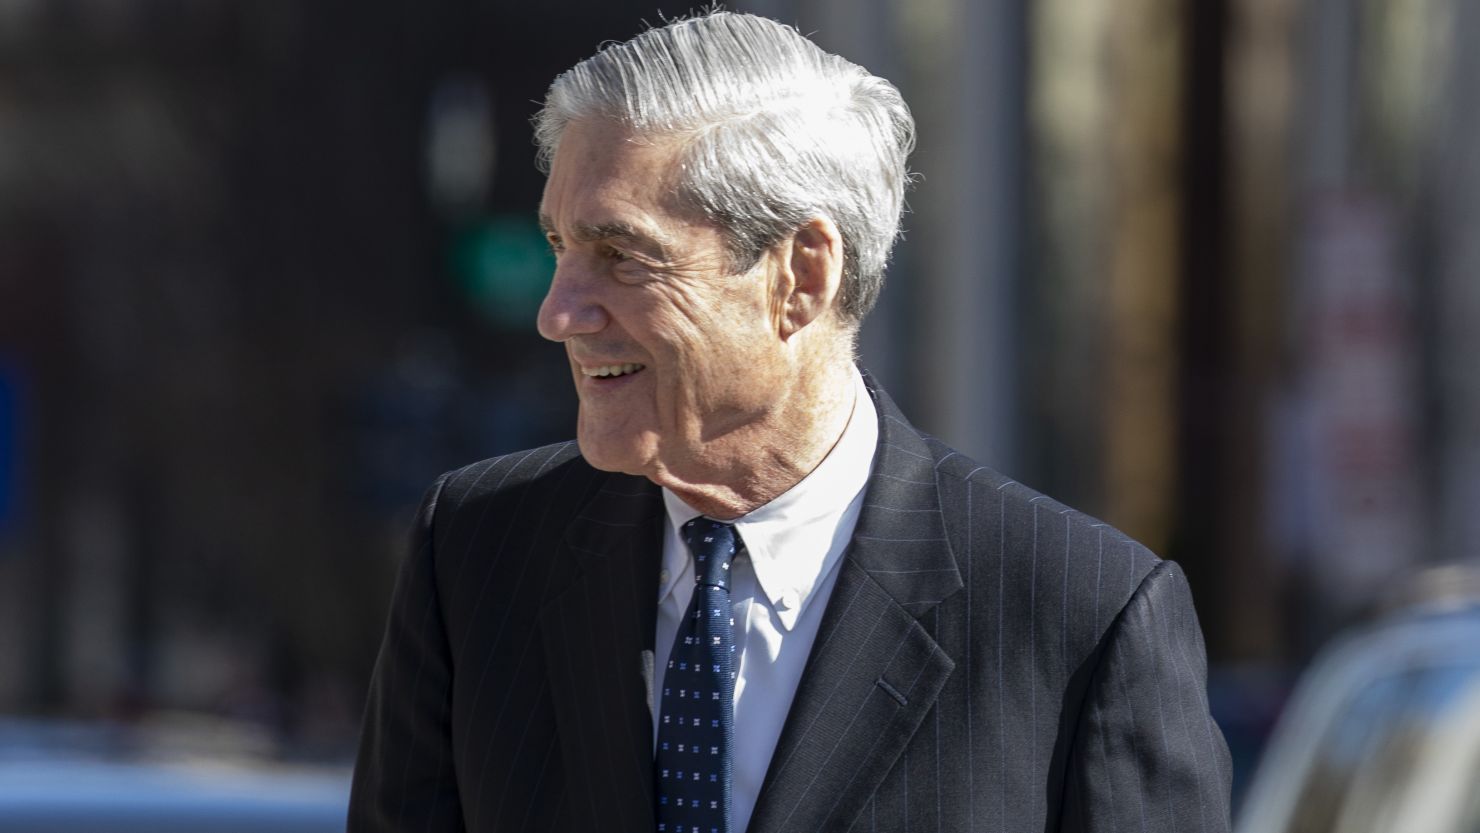 Special Counsel Robert Mueller walks after attending church on March 24, 2019 in Washington, DC. (Photo by Tasos Katopodis/Getty Images)